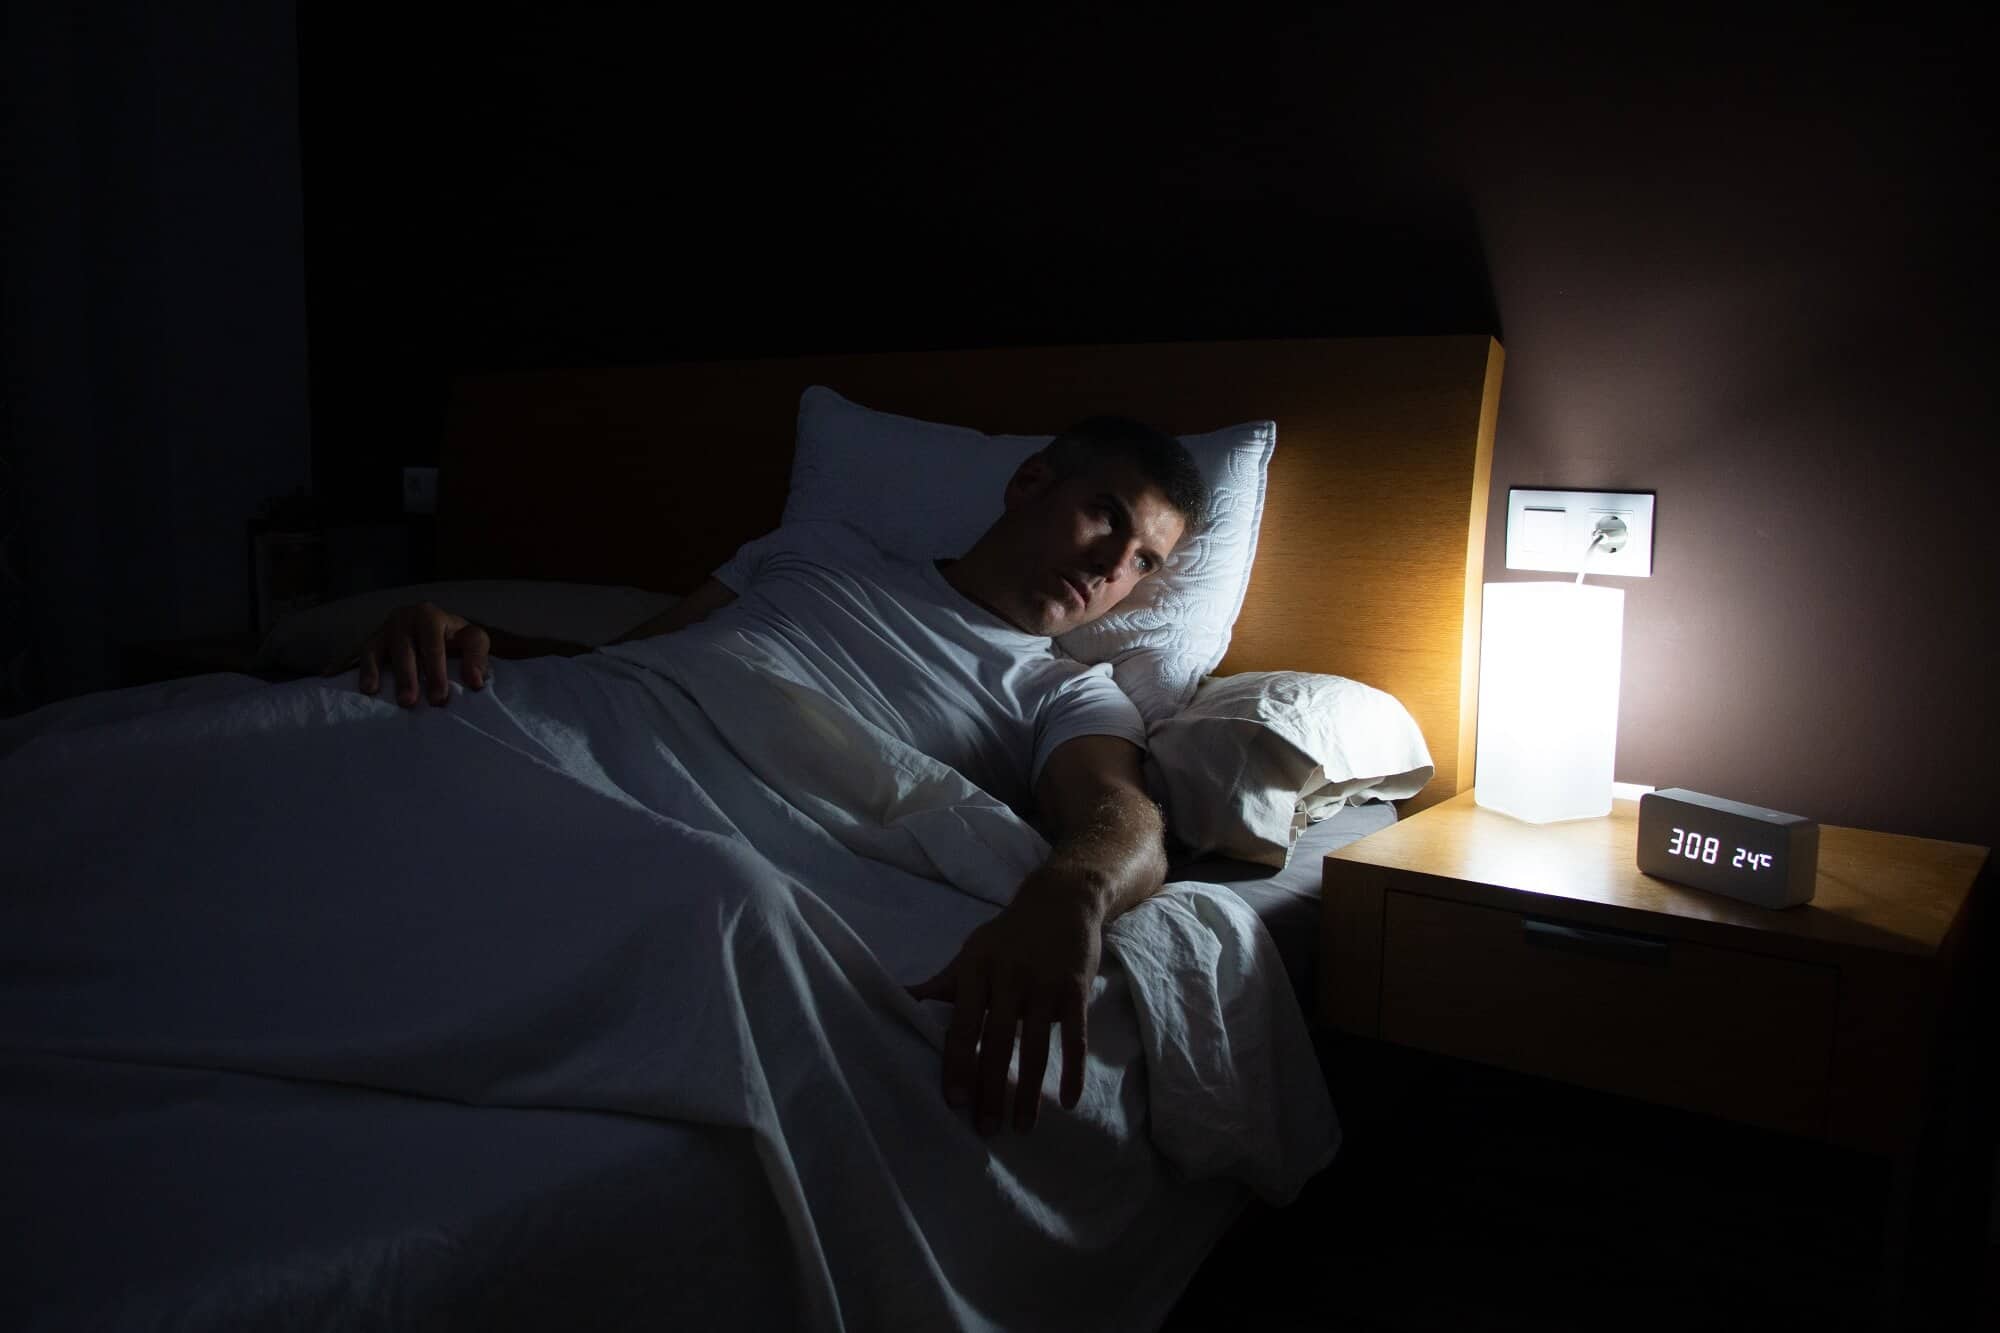 Why Do 70 Million Americans Suffer from Chronic Sleep Issues?